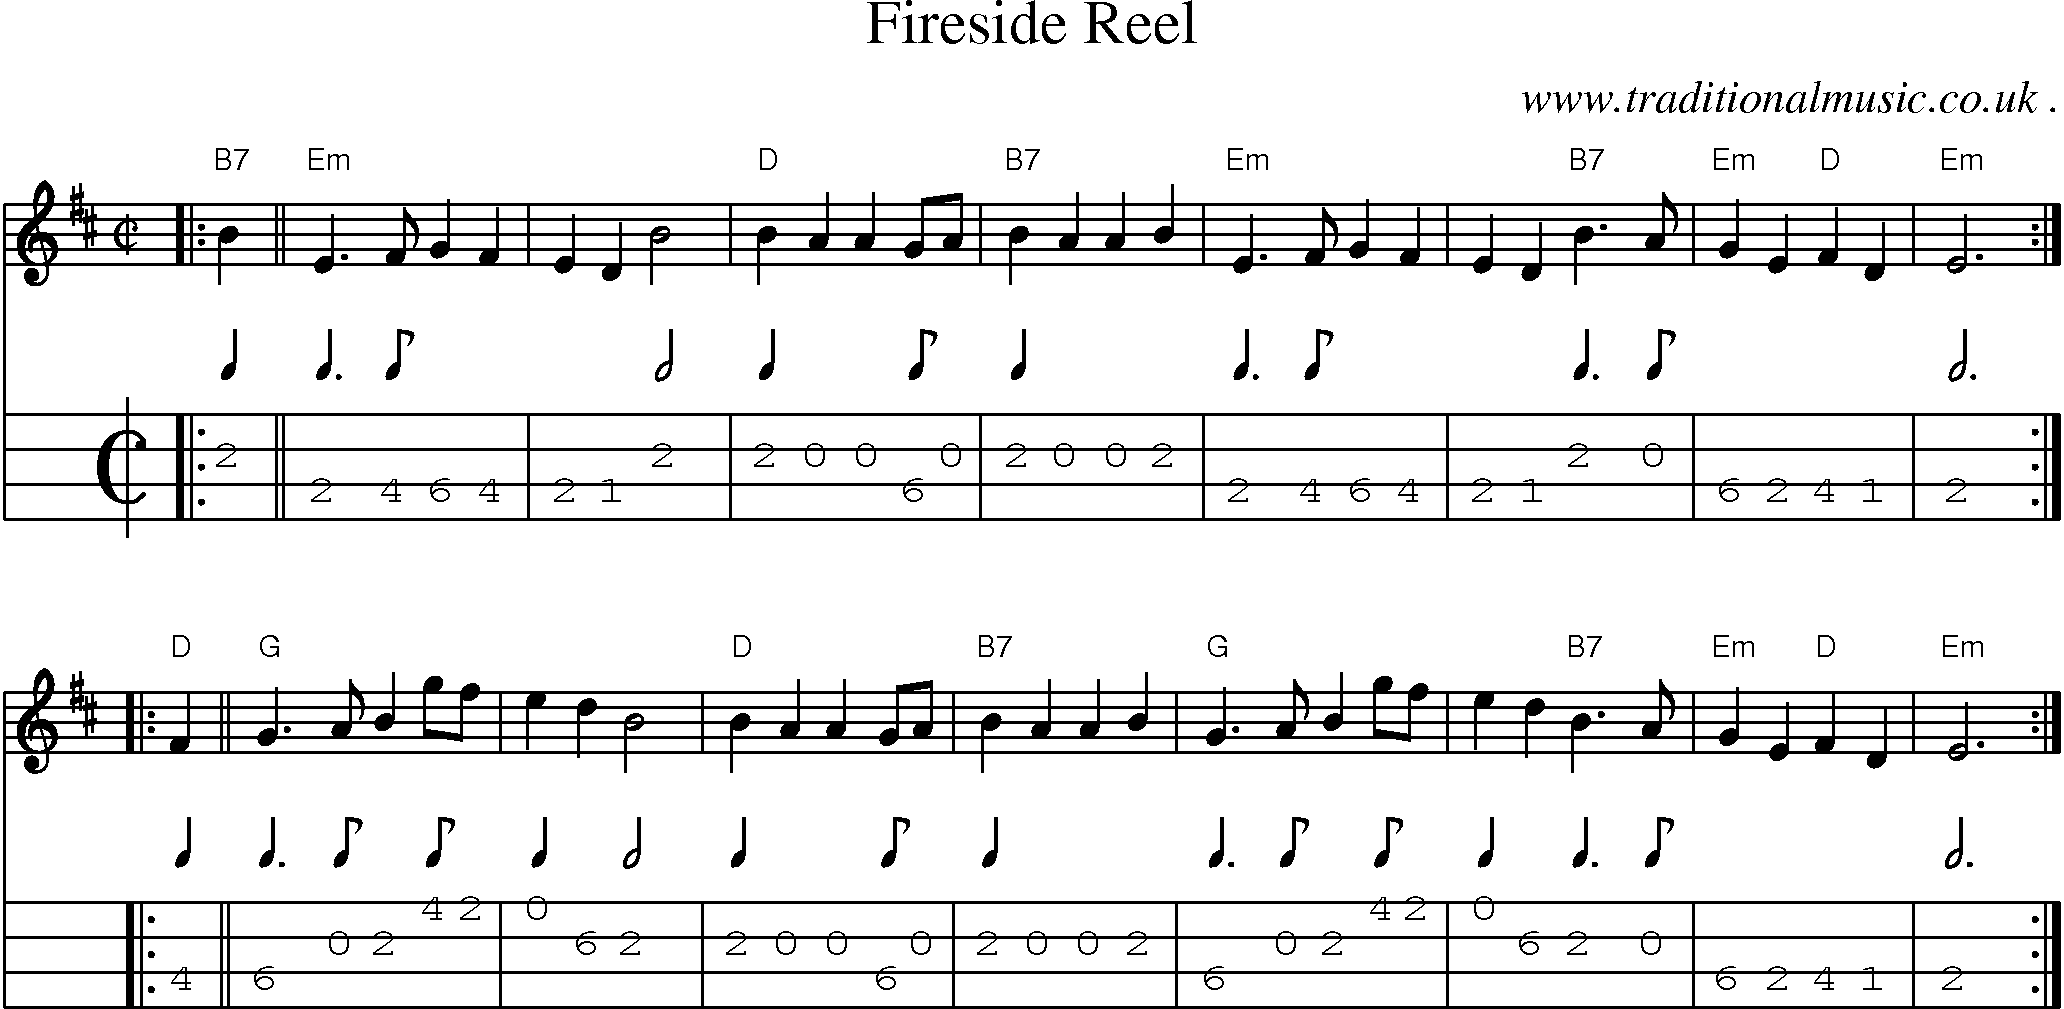 Sheet-music  score, Chords and Mandolin Tabs for Fireside Reel